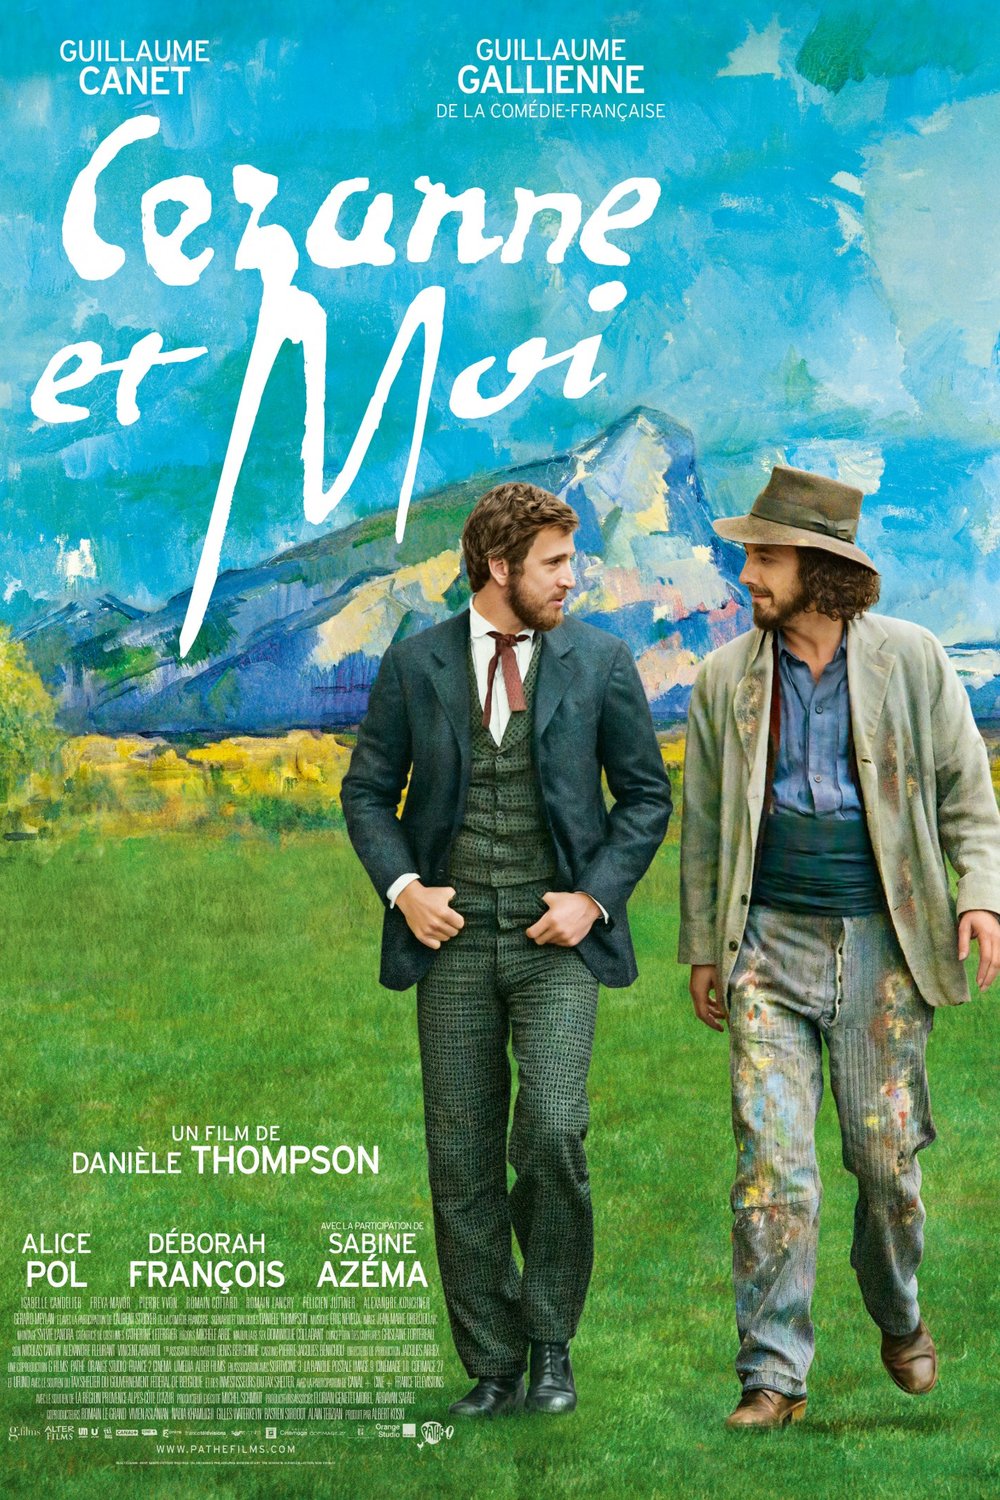 Poster of the movie Cézanne et moi